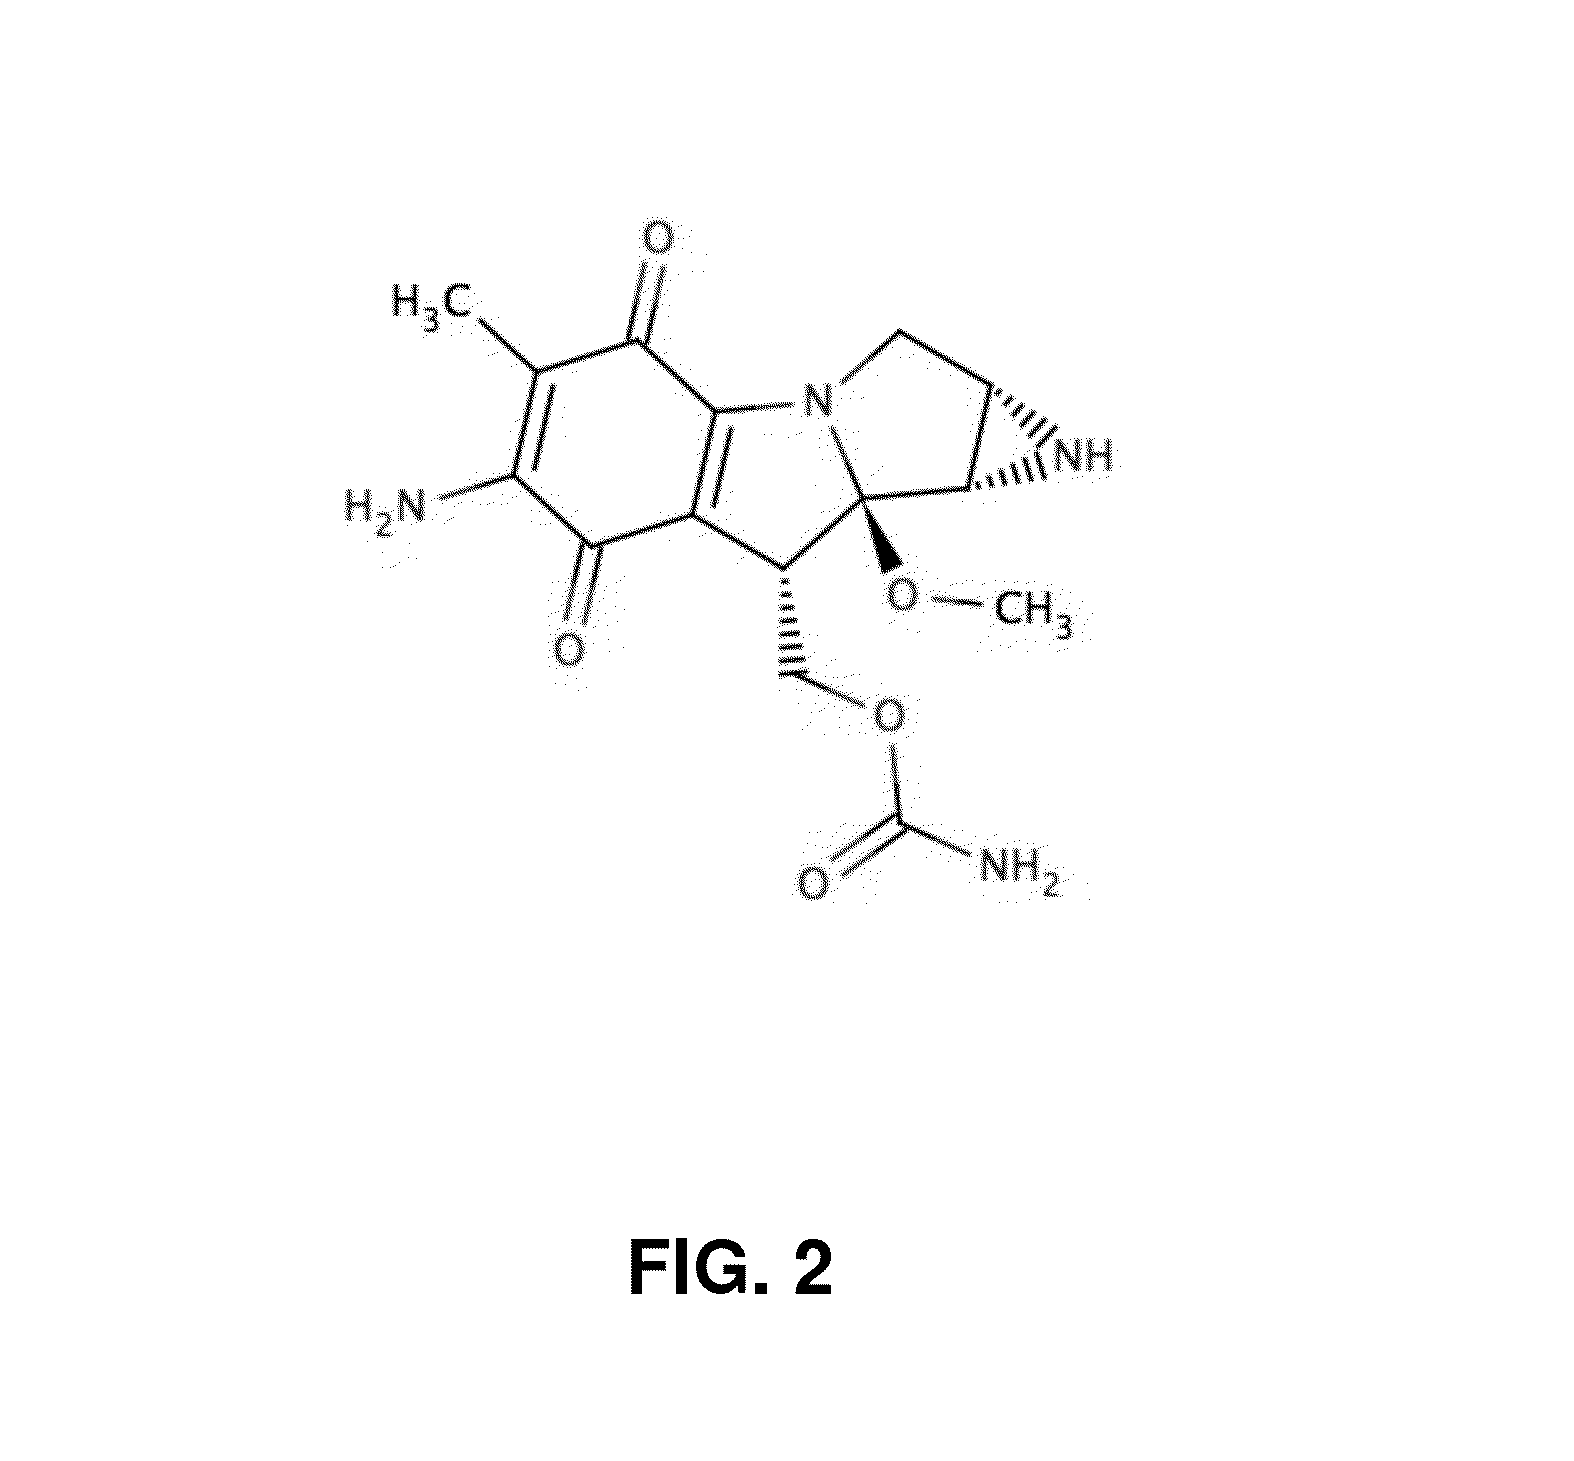 Insertable medical device for delivering nano-carriers of mitomycin (and its analogues) to a target site, and methods for preparing and using the same